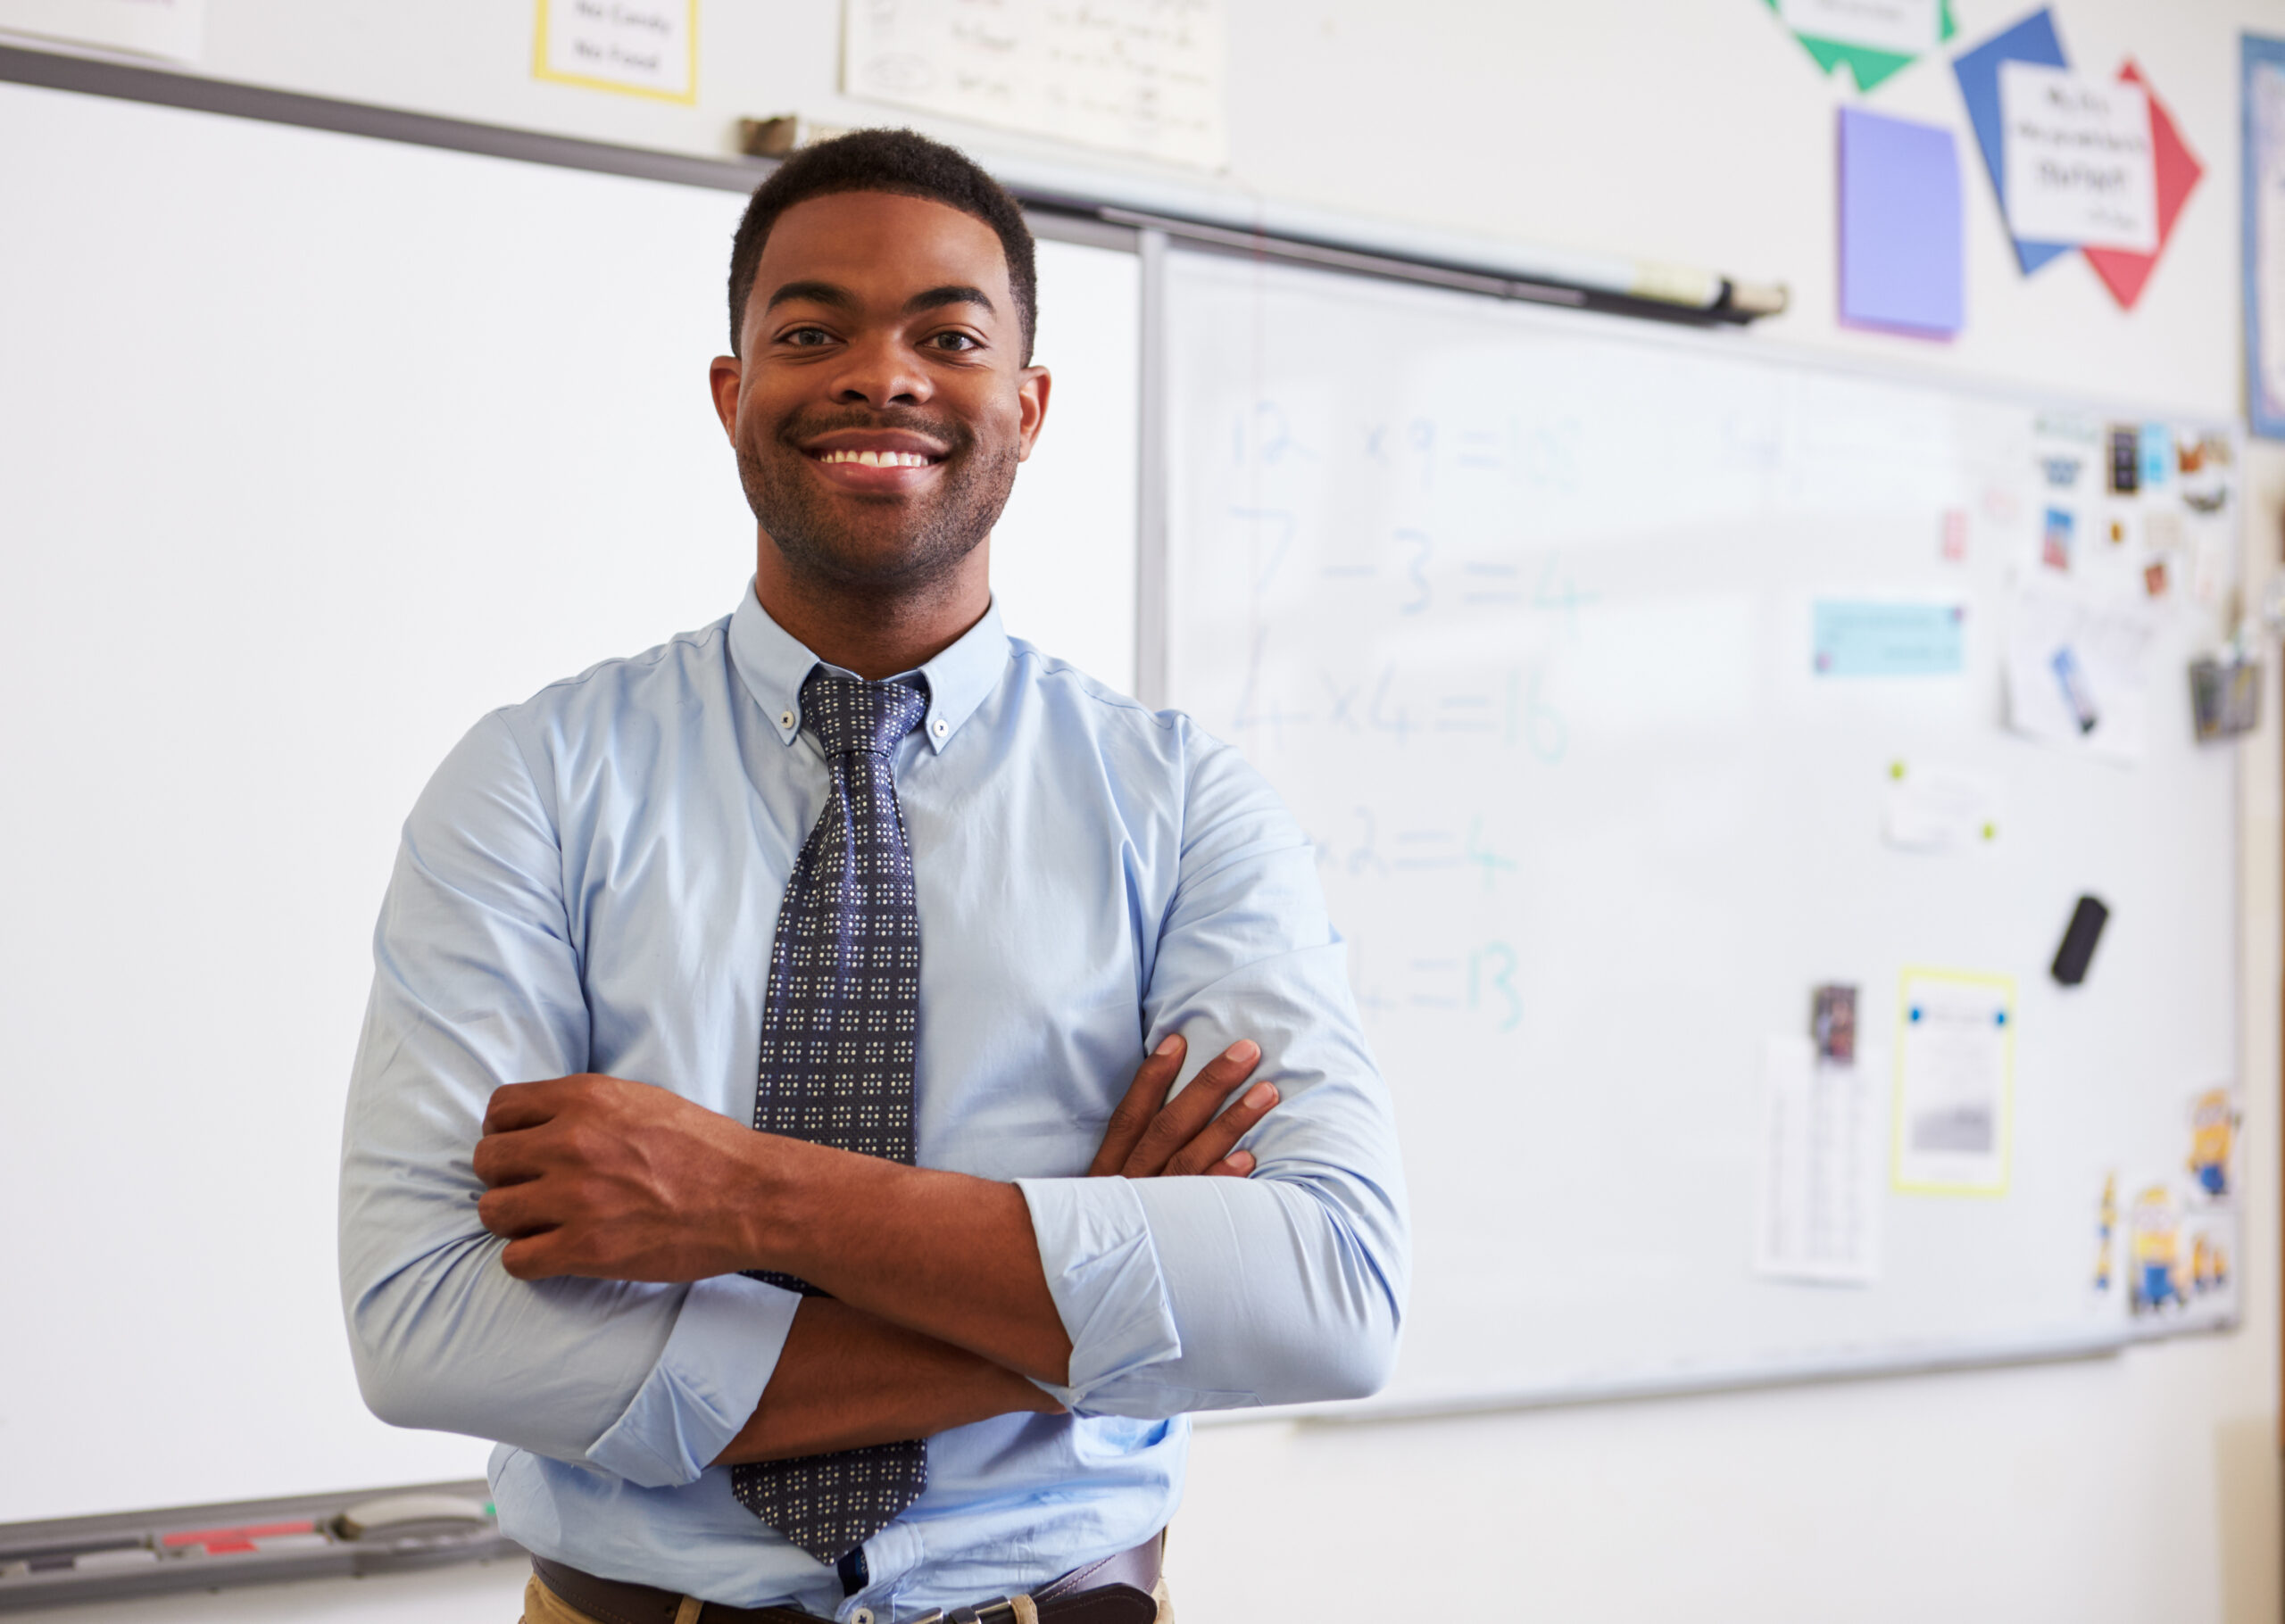 Male teacher stands in front of a white board in a classroom. He is smiling with his arms crossed.